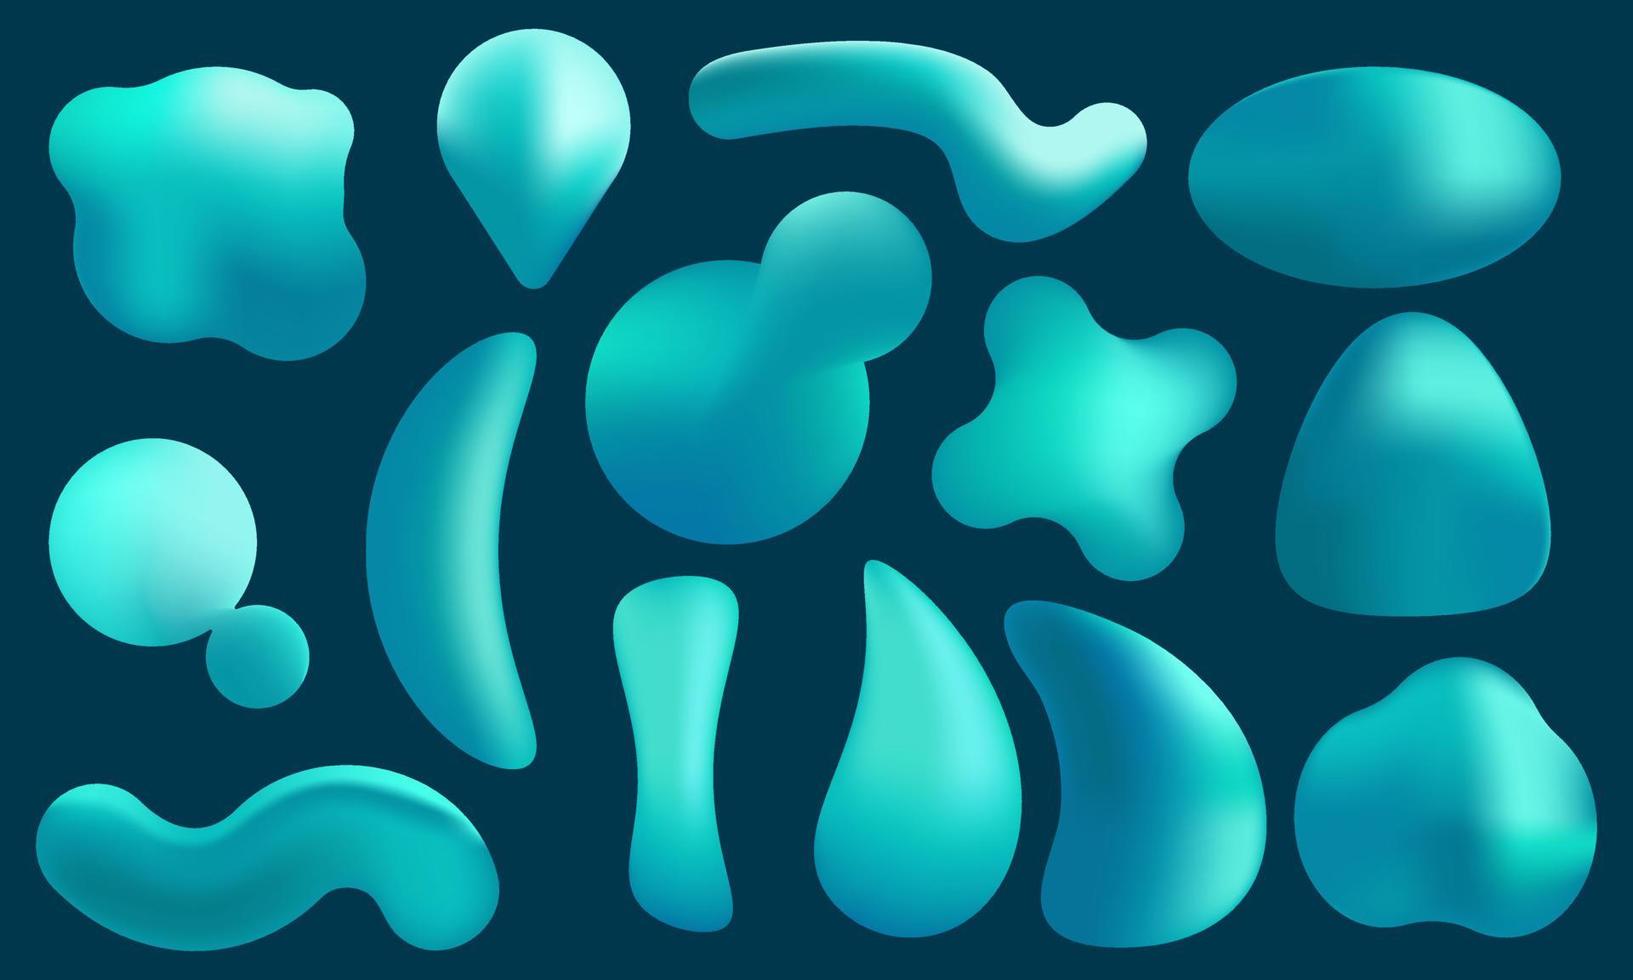 Collection of liquid abstract shapes vector